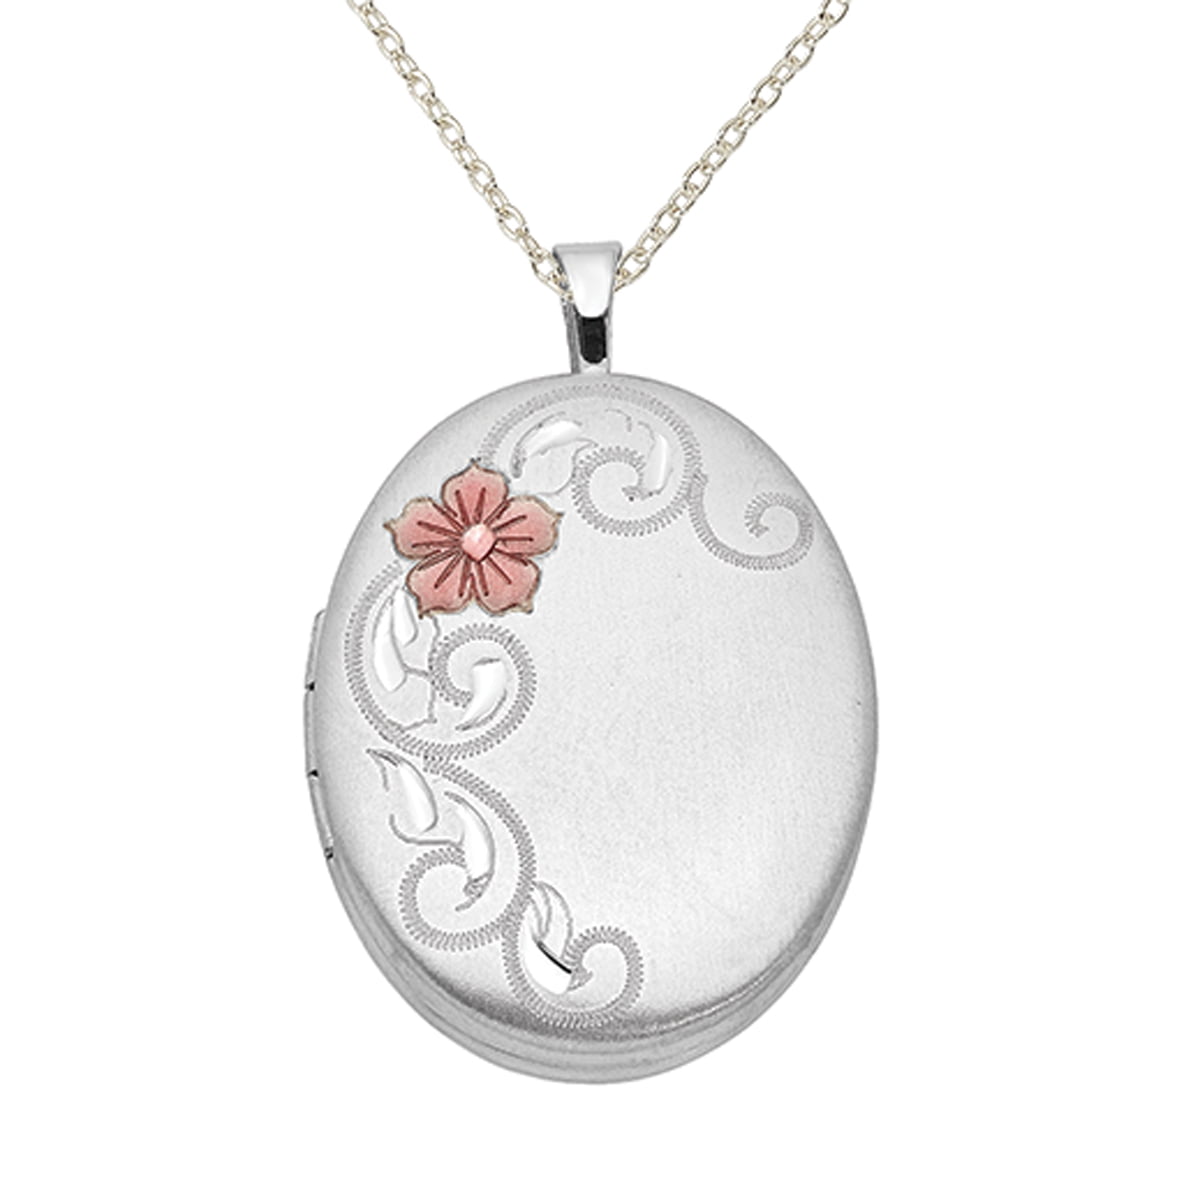 Beautiful Sterling Silver Rhodium-plated 26mm Oval with Flowers Oval Locket